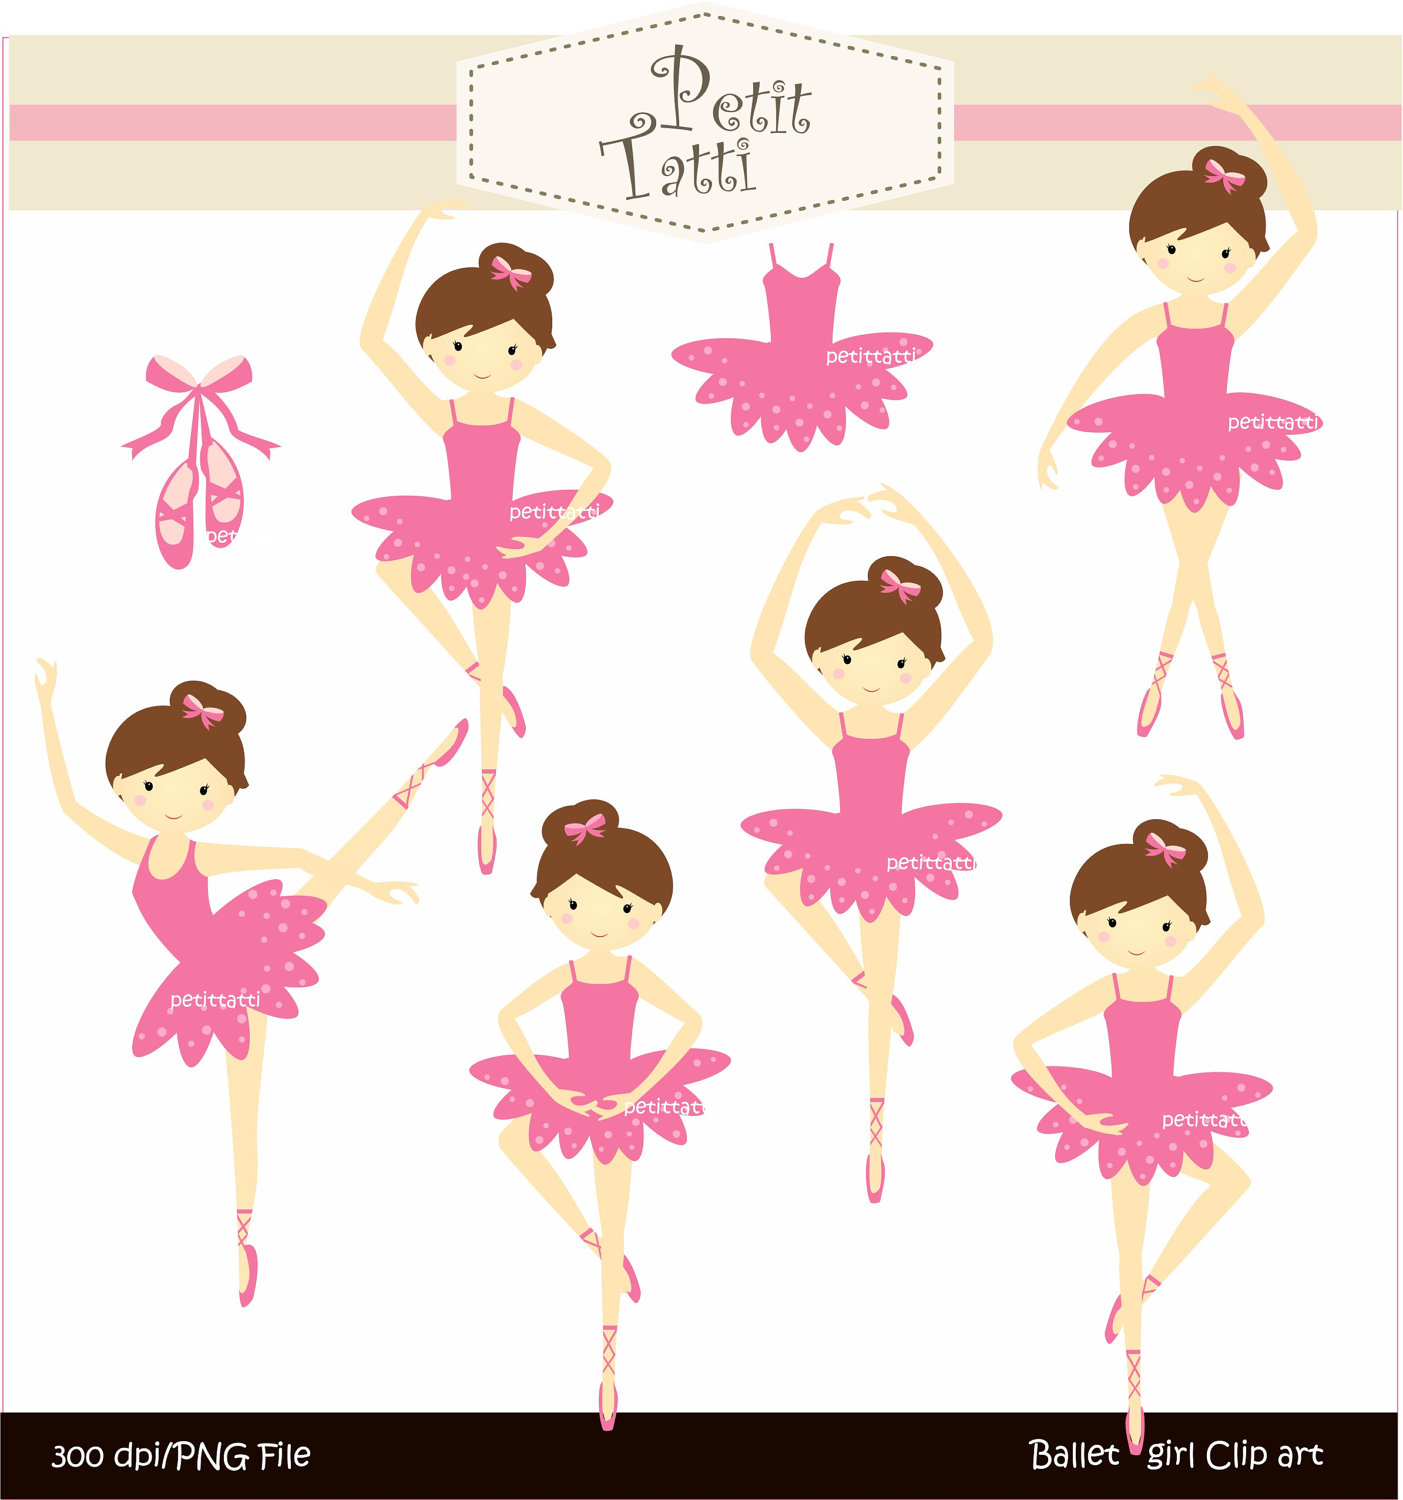 Sitting Ballerina Yellow Tutu Flowered Umbrella Pearl Necklace Clipart Instant Download Baby Girl 3 Skin Tones Puffs